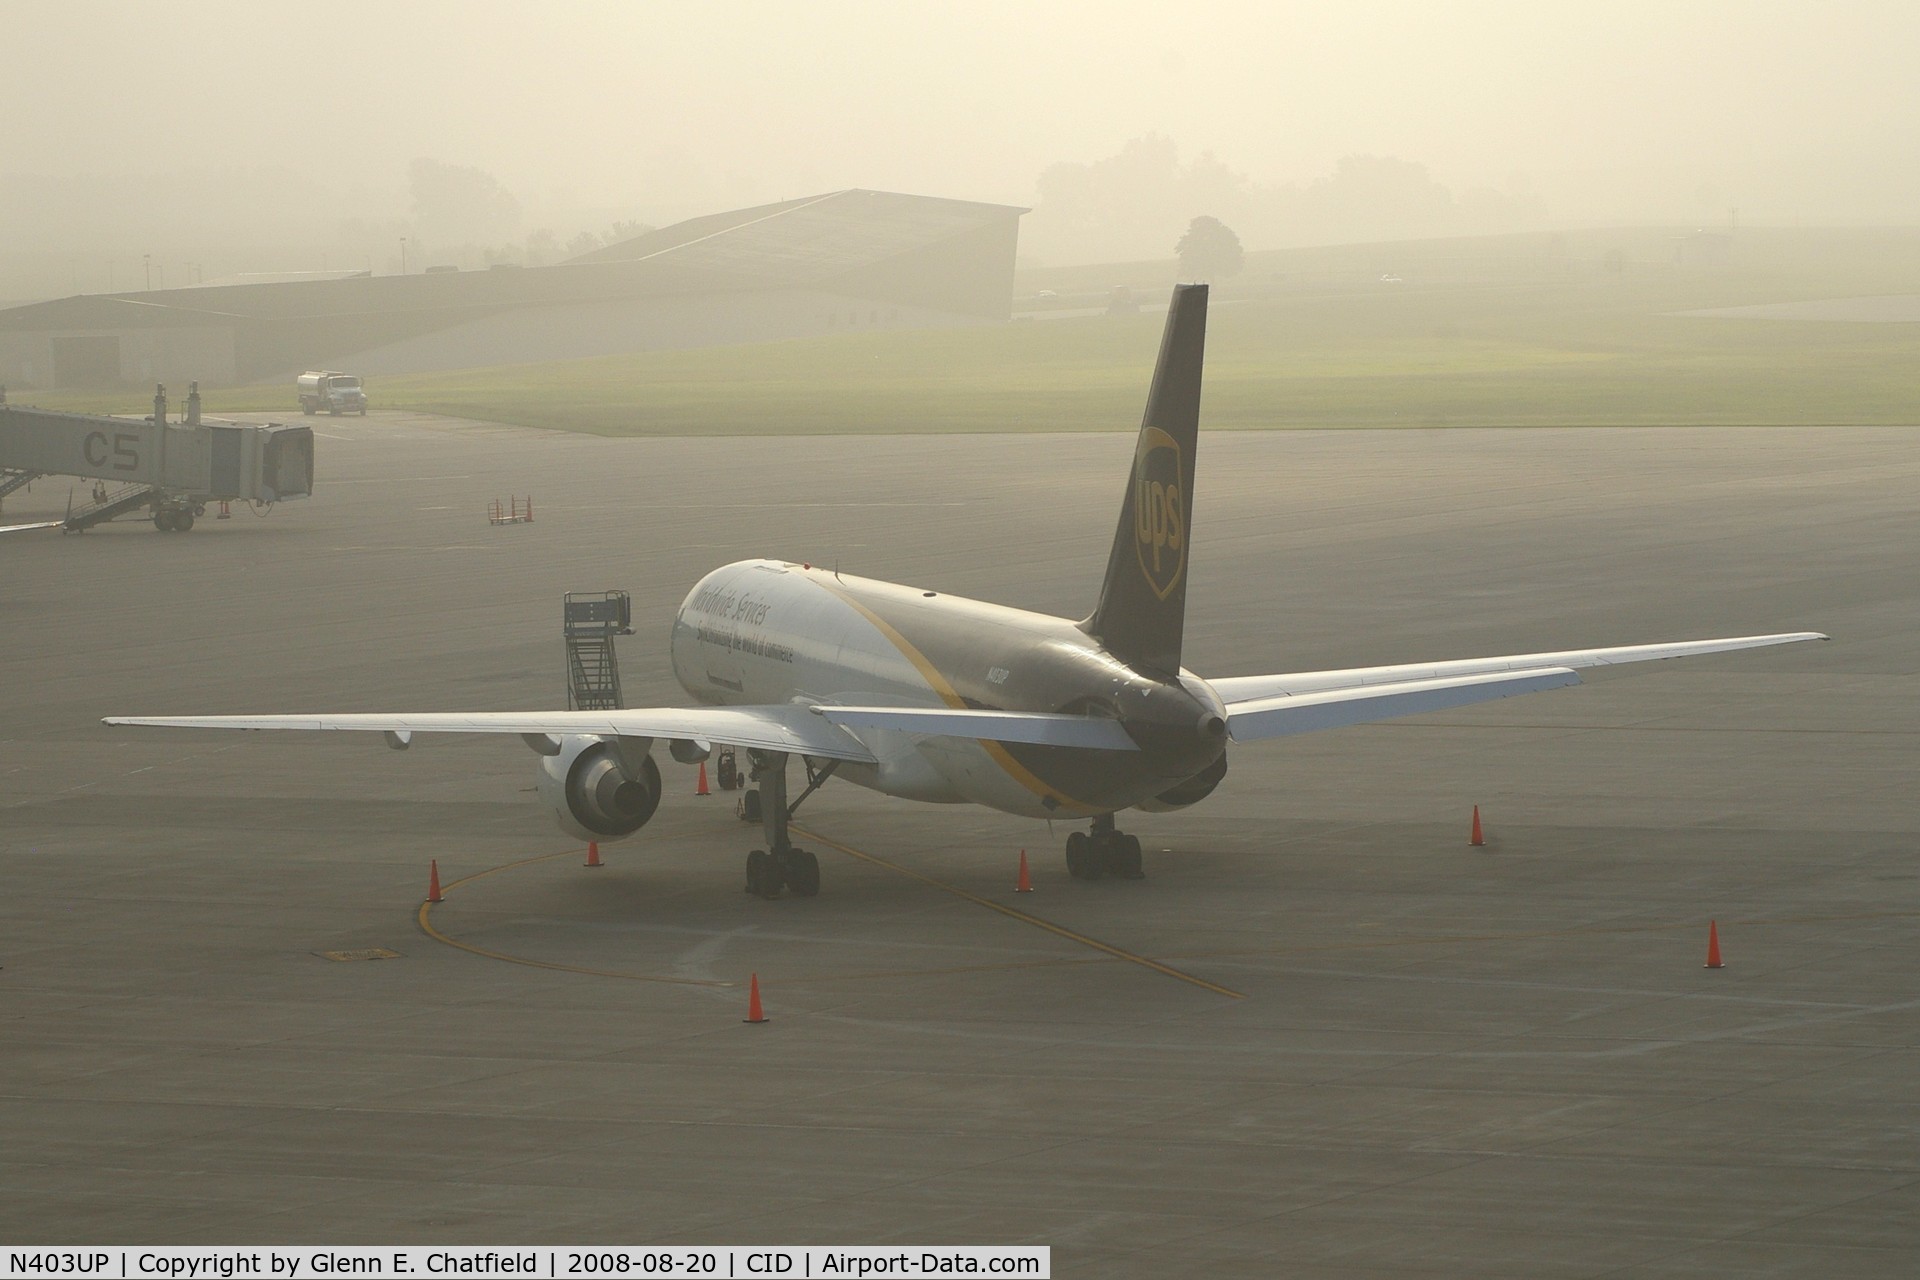 N403UP, 1987 Boeing 757-24APF C/N 23725, Early morning fog on the UPS ramp.  Fog is clearing